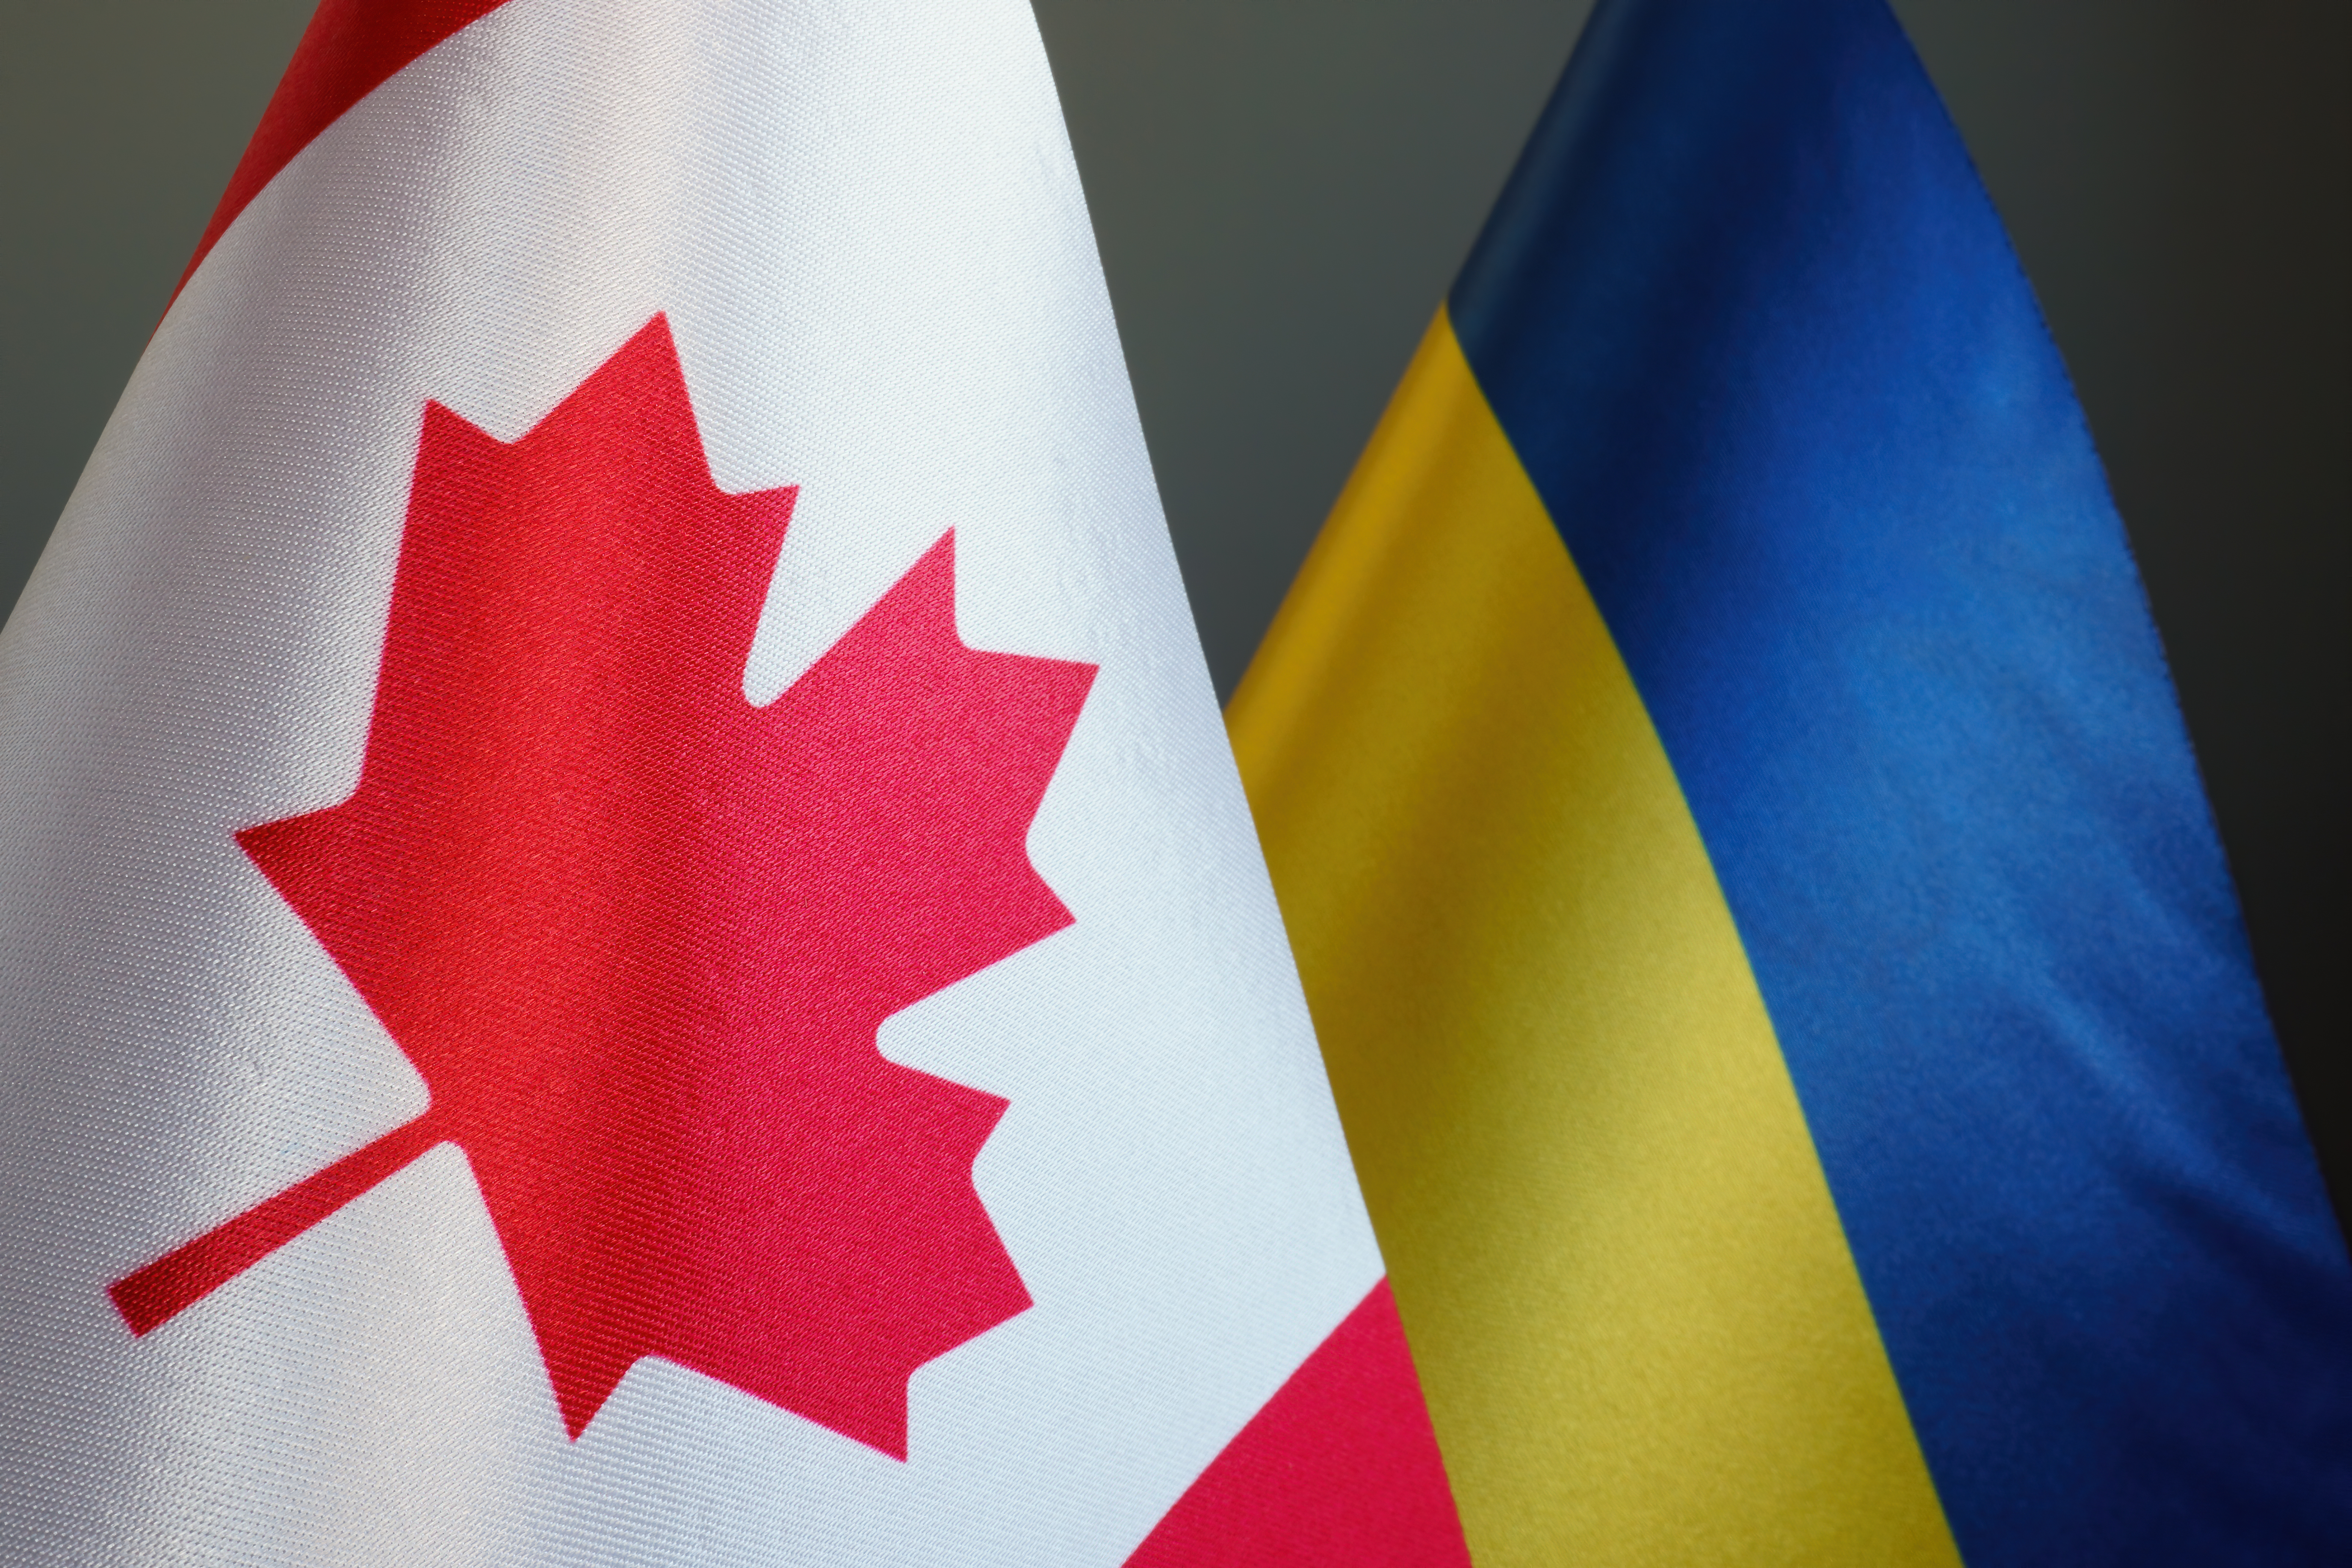 Flags of Canada and Ukraine as symbol of cooperation.